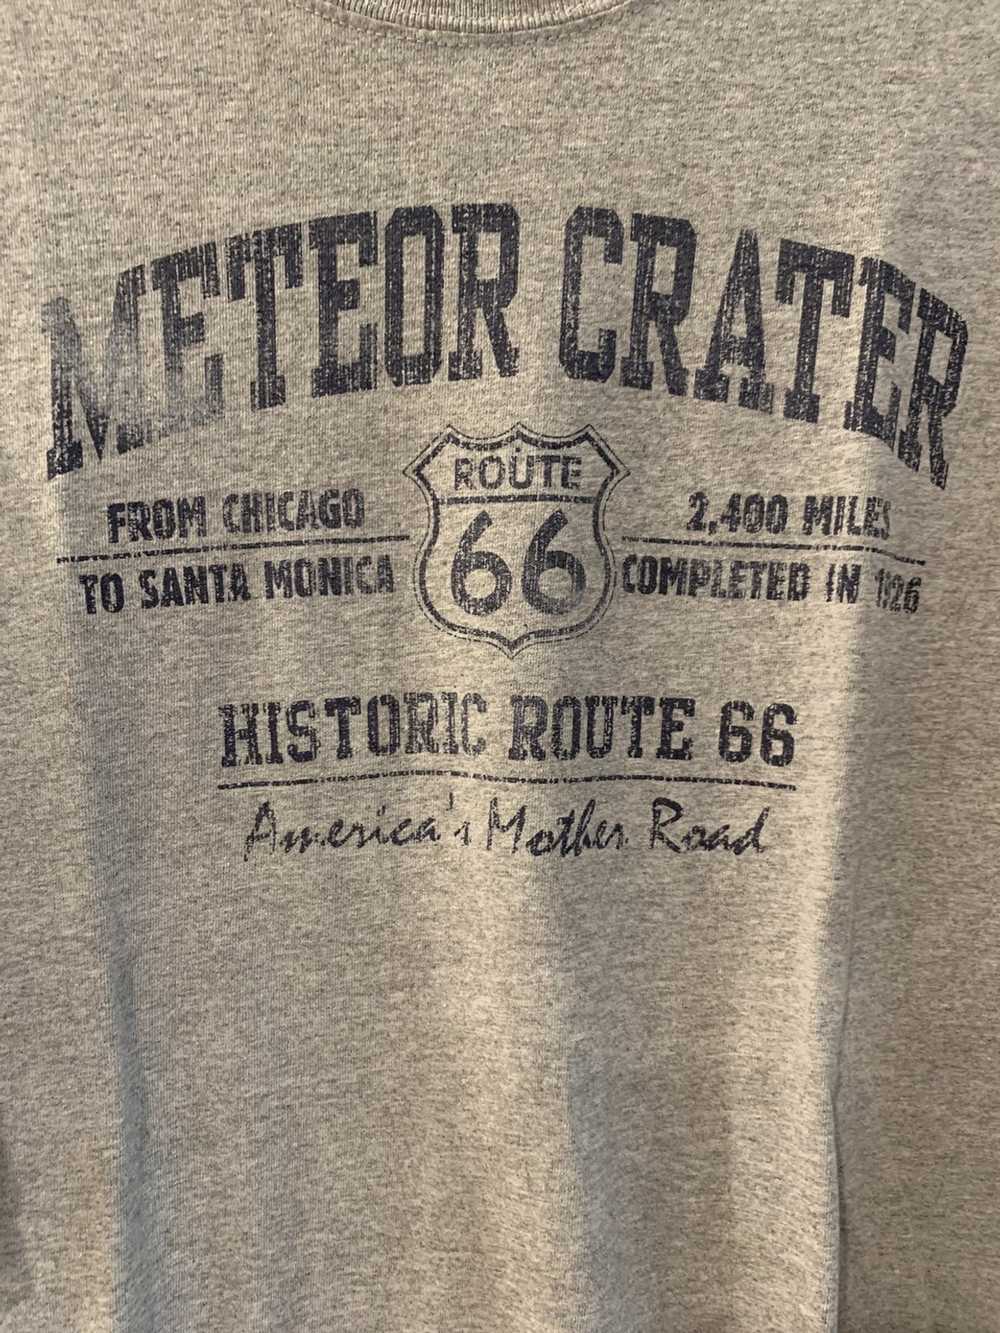 Racing × Route 66 × Vintage Route 66 Meteor Crate… - image 2